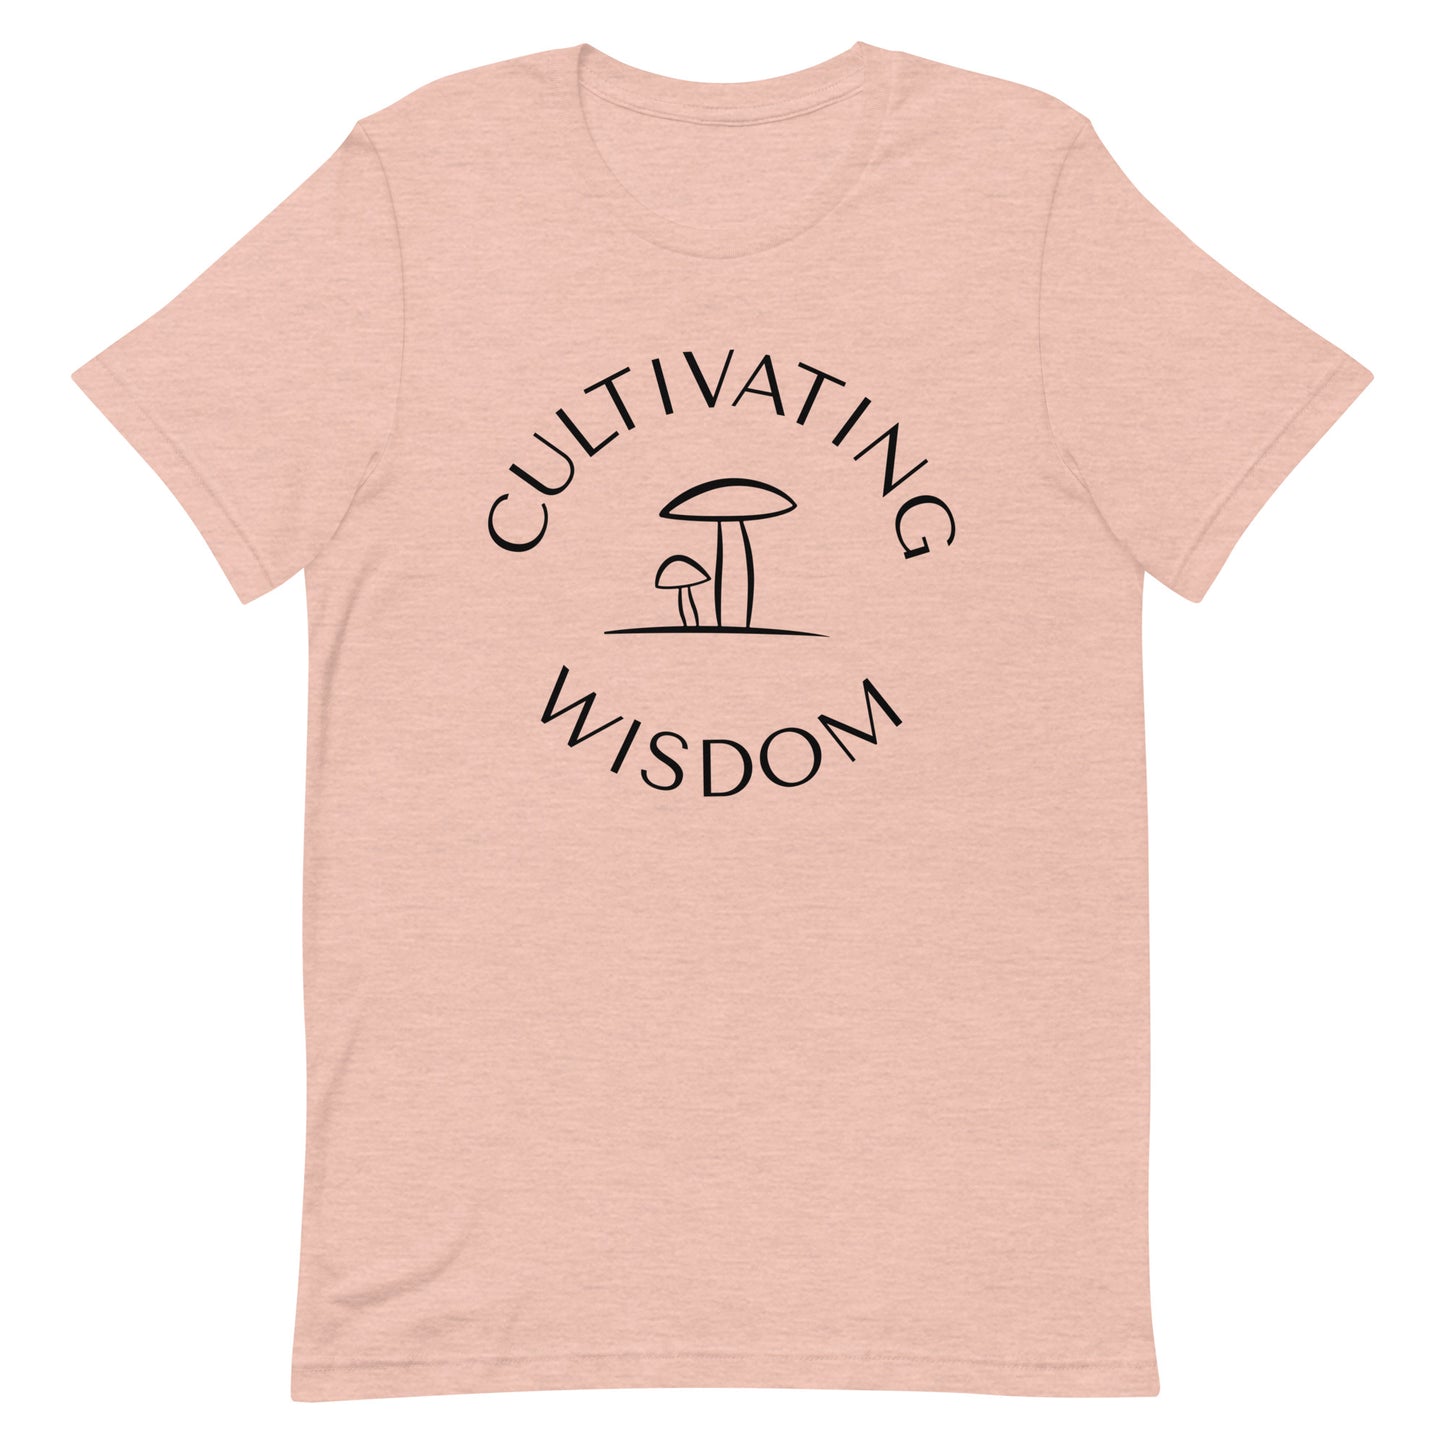 Cultivating Wisdom Earth Colors Unisex t-shirt